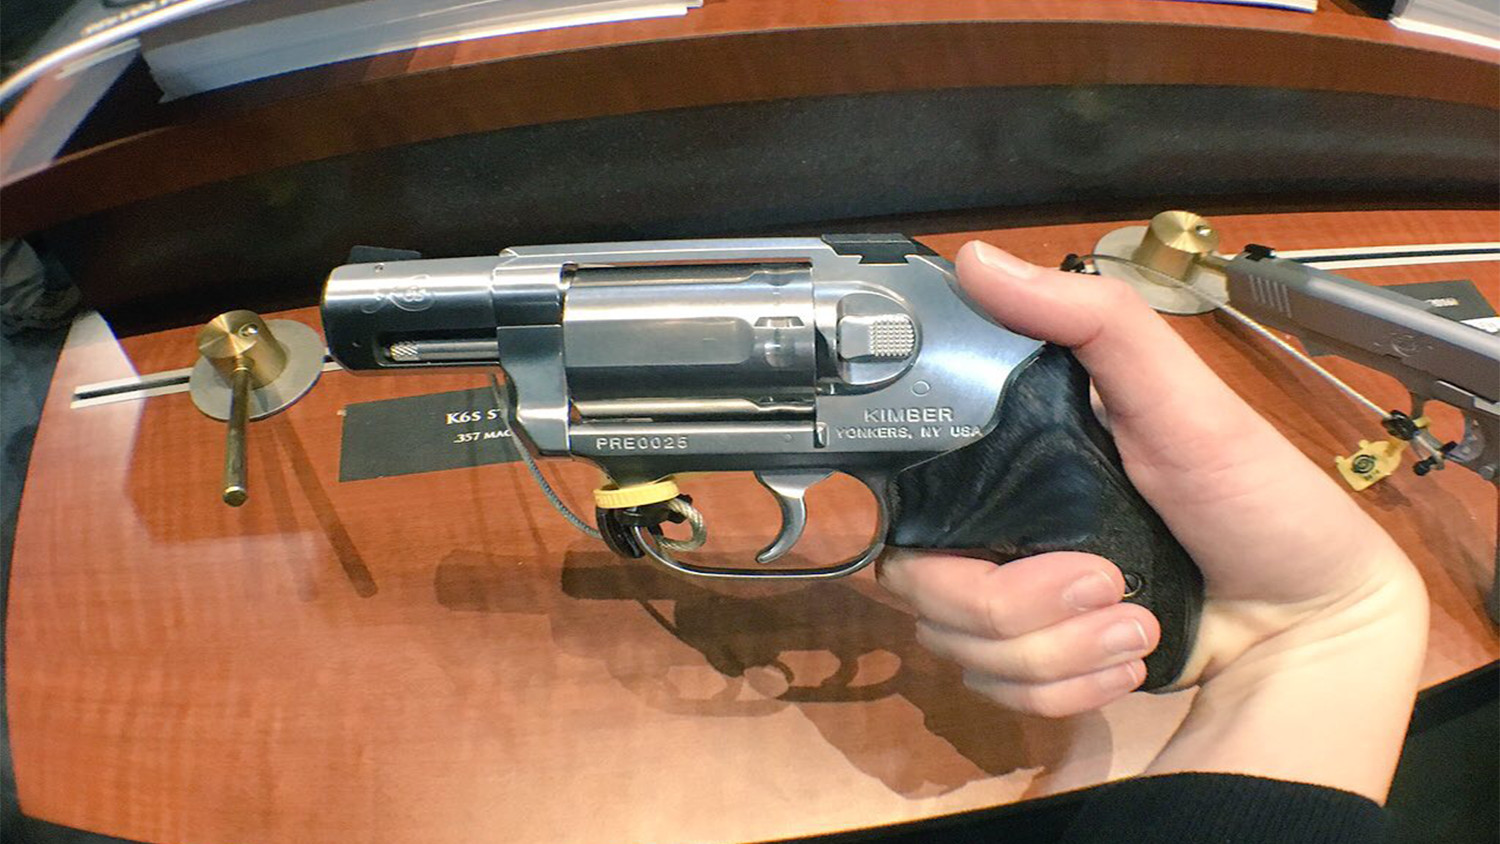 Live from SHOT Show: Kimber Releases The REeVOLVE K6s